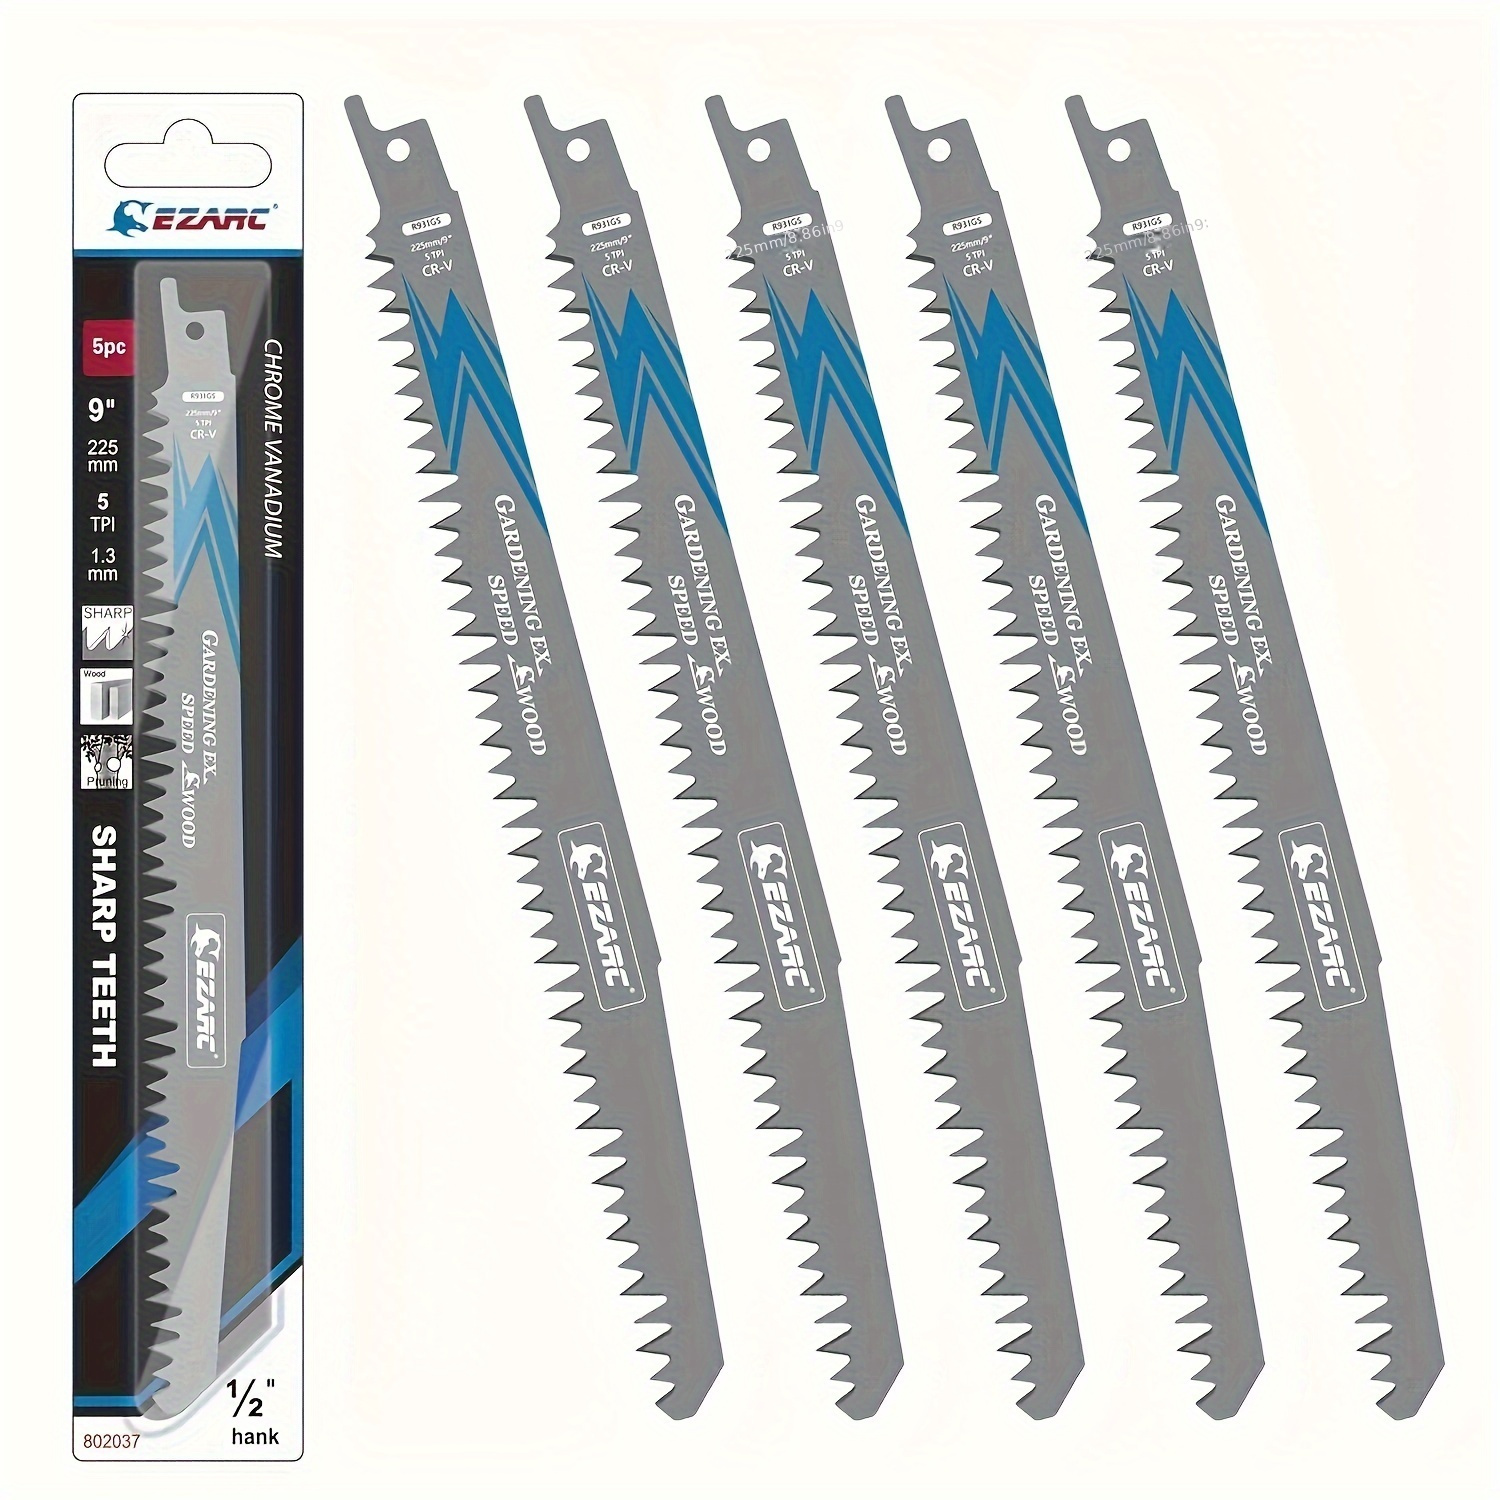 

Ezarc 5pcs Reciprocating Saw Blade Set 6"/9"/12" Cutting Sabre Saw Blade Flexible Wood Pruning Cutting Saw Blade For Cutting Wood Branch Pvc Pipes 6tpi (r644gs) / 5tpi (r931gs R1231gs)